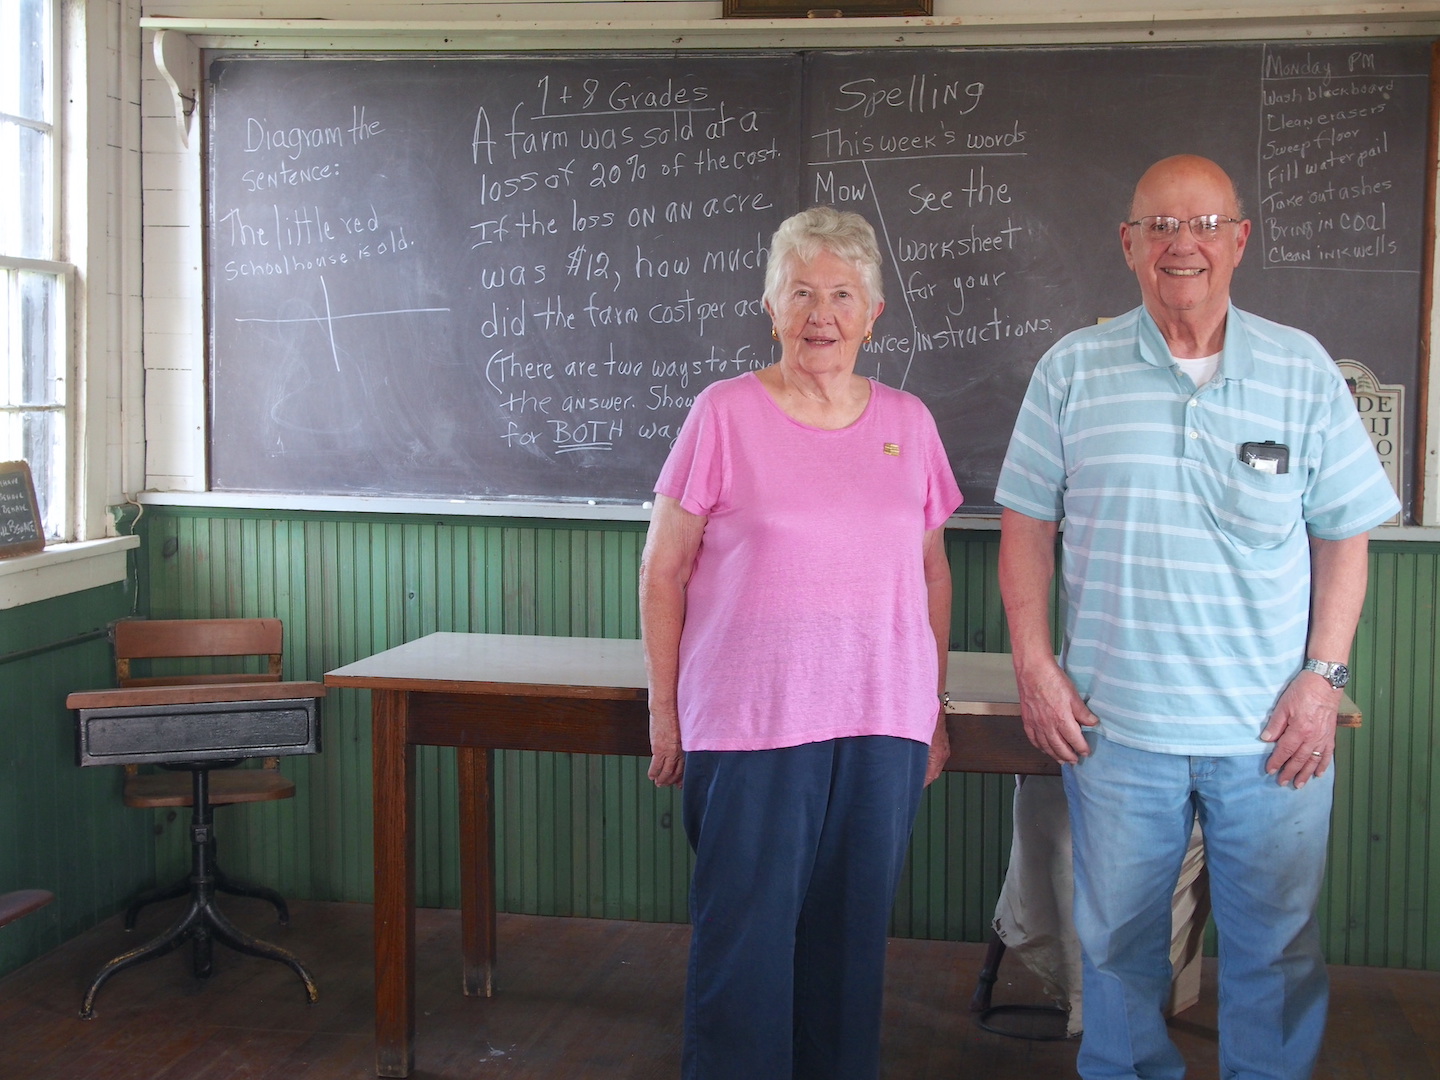 June Crawford, chair of the Historic Preservation Advisory Board, and Joseph Macaluso, past chair, enjoy showing off the one-room schoolhouse at Kelly's Country Store.